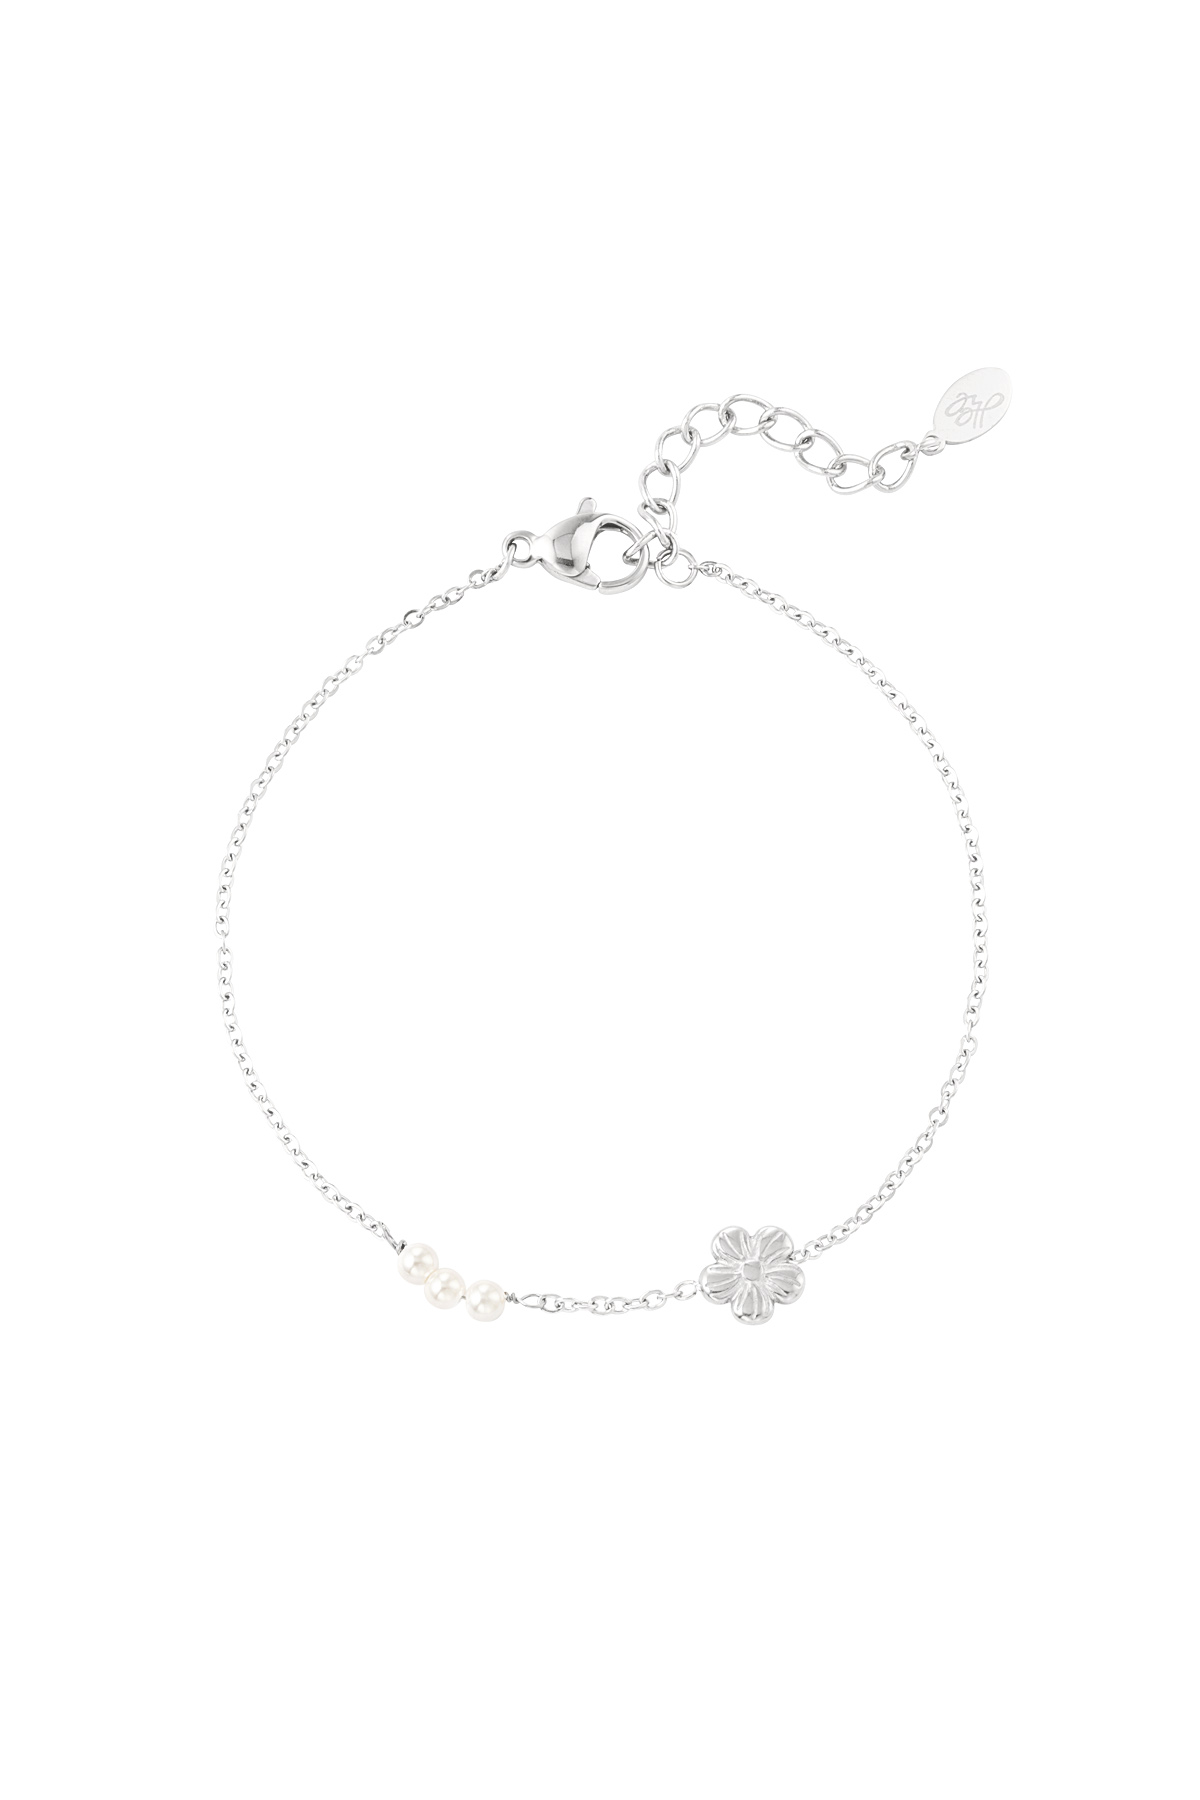 Bracelet flower with pearls - silver